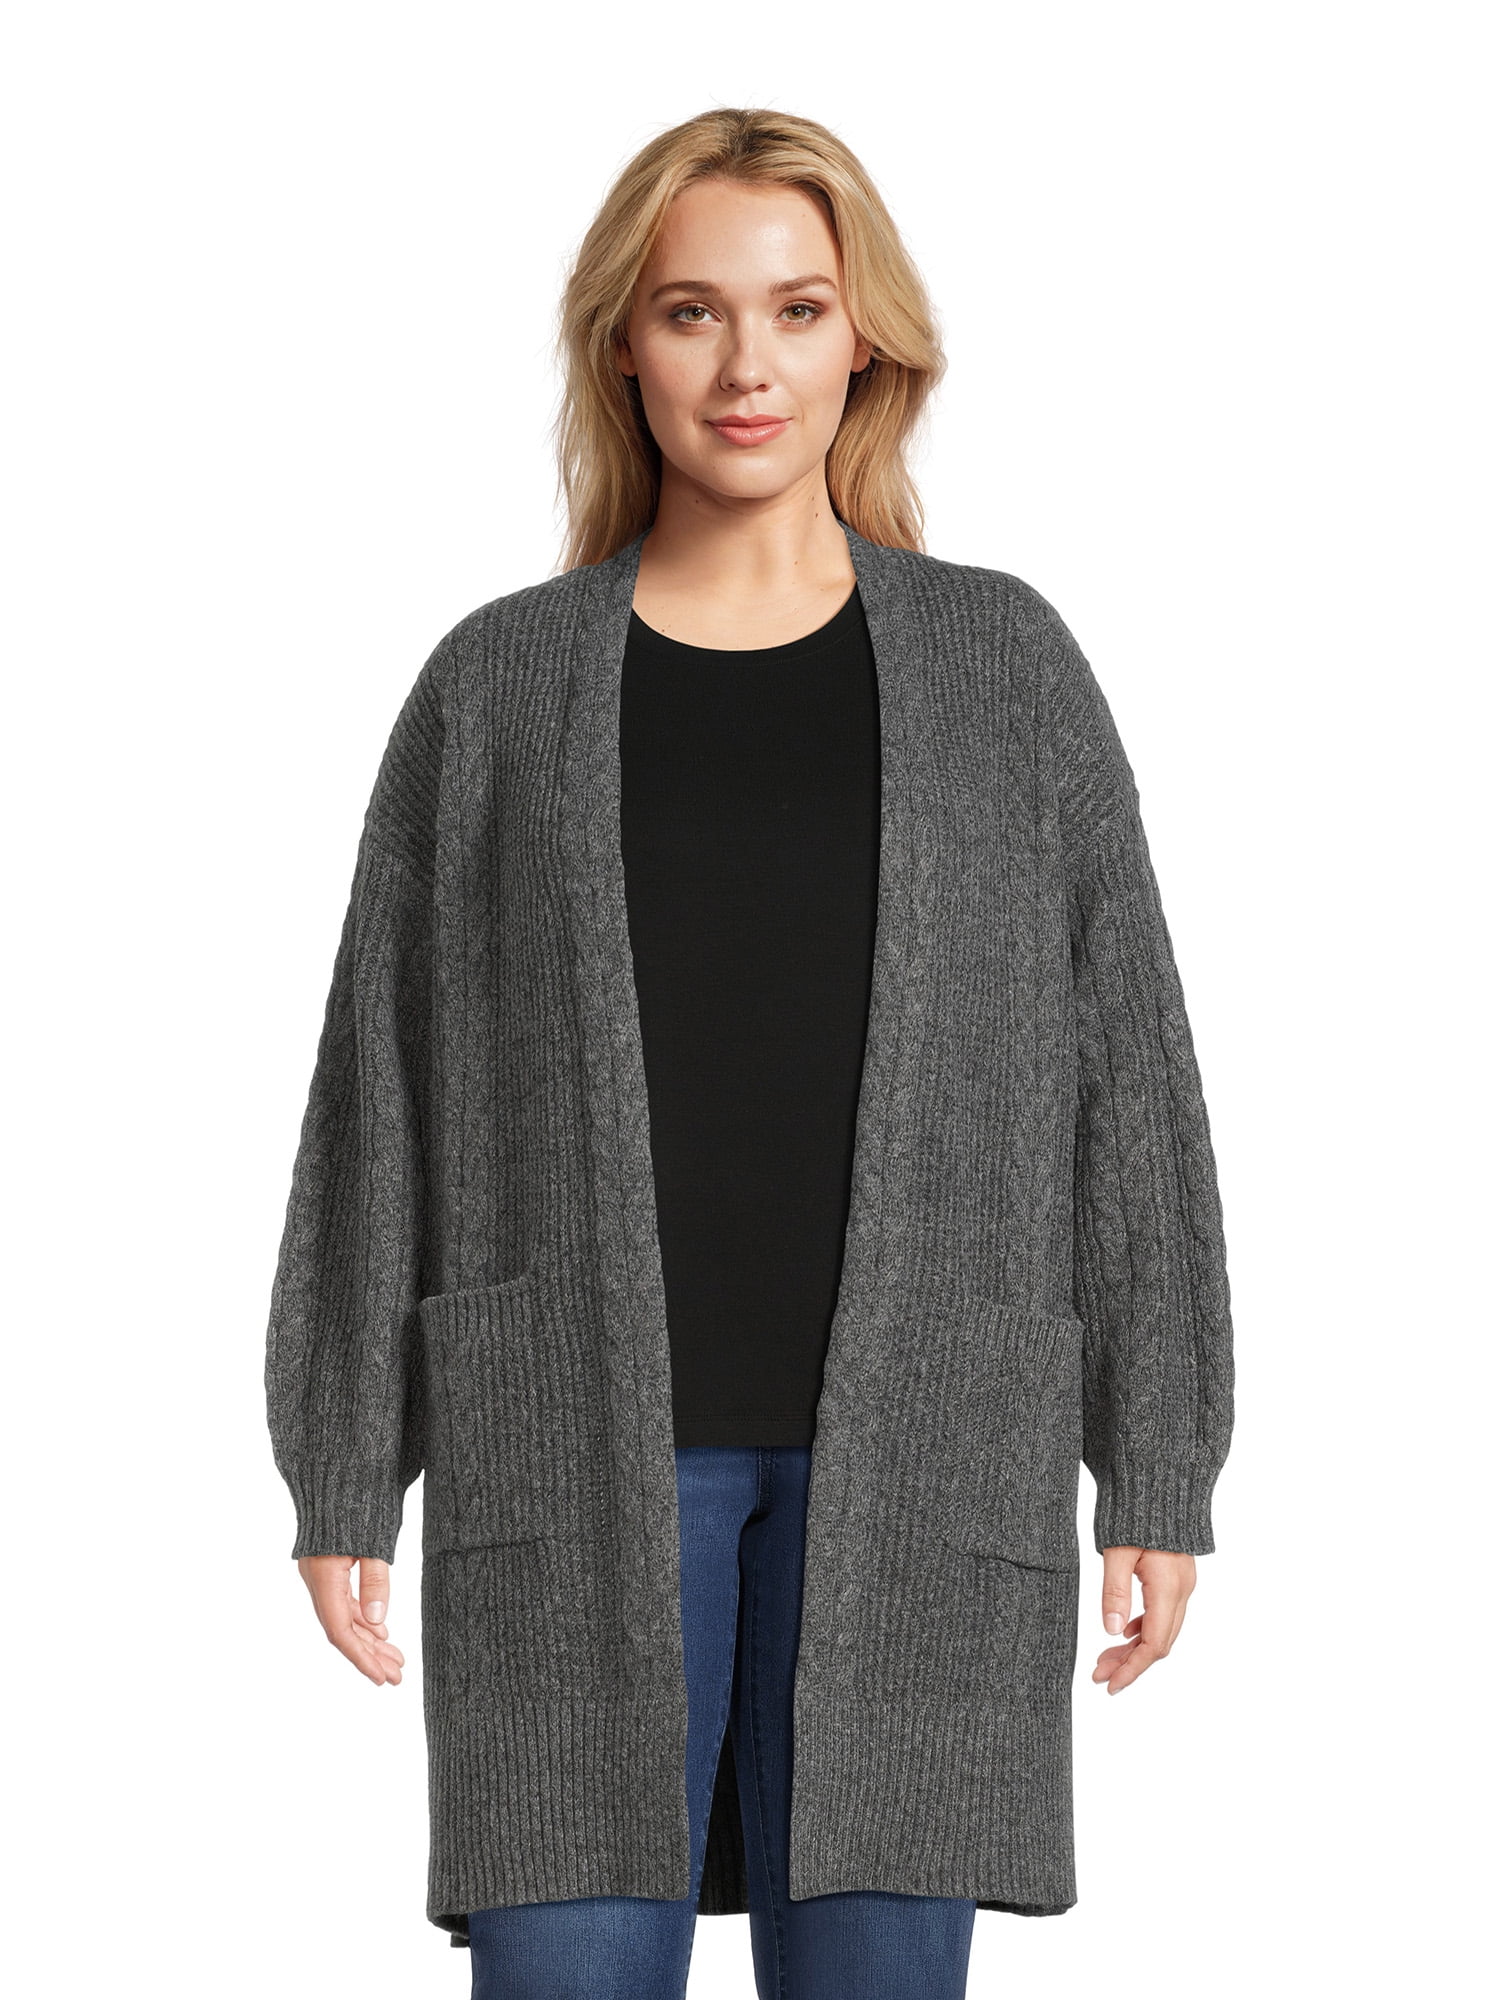 Terra & Sky Women's Plus Size Cable Duster Cardigan Sweater, Midweight ...